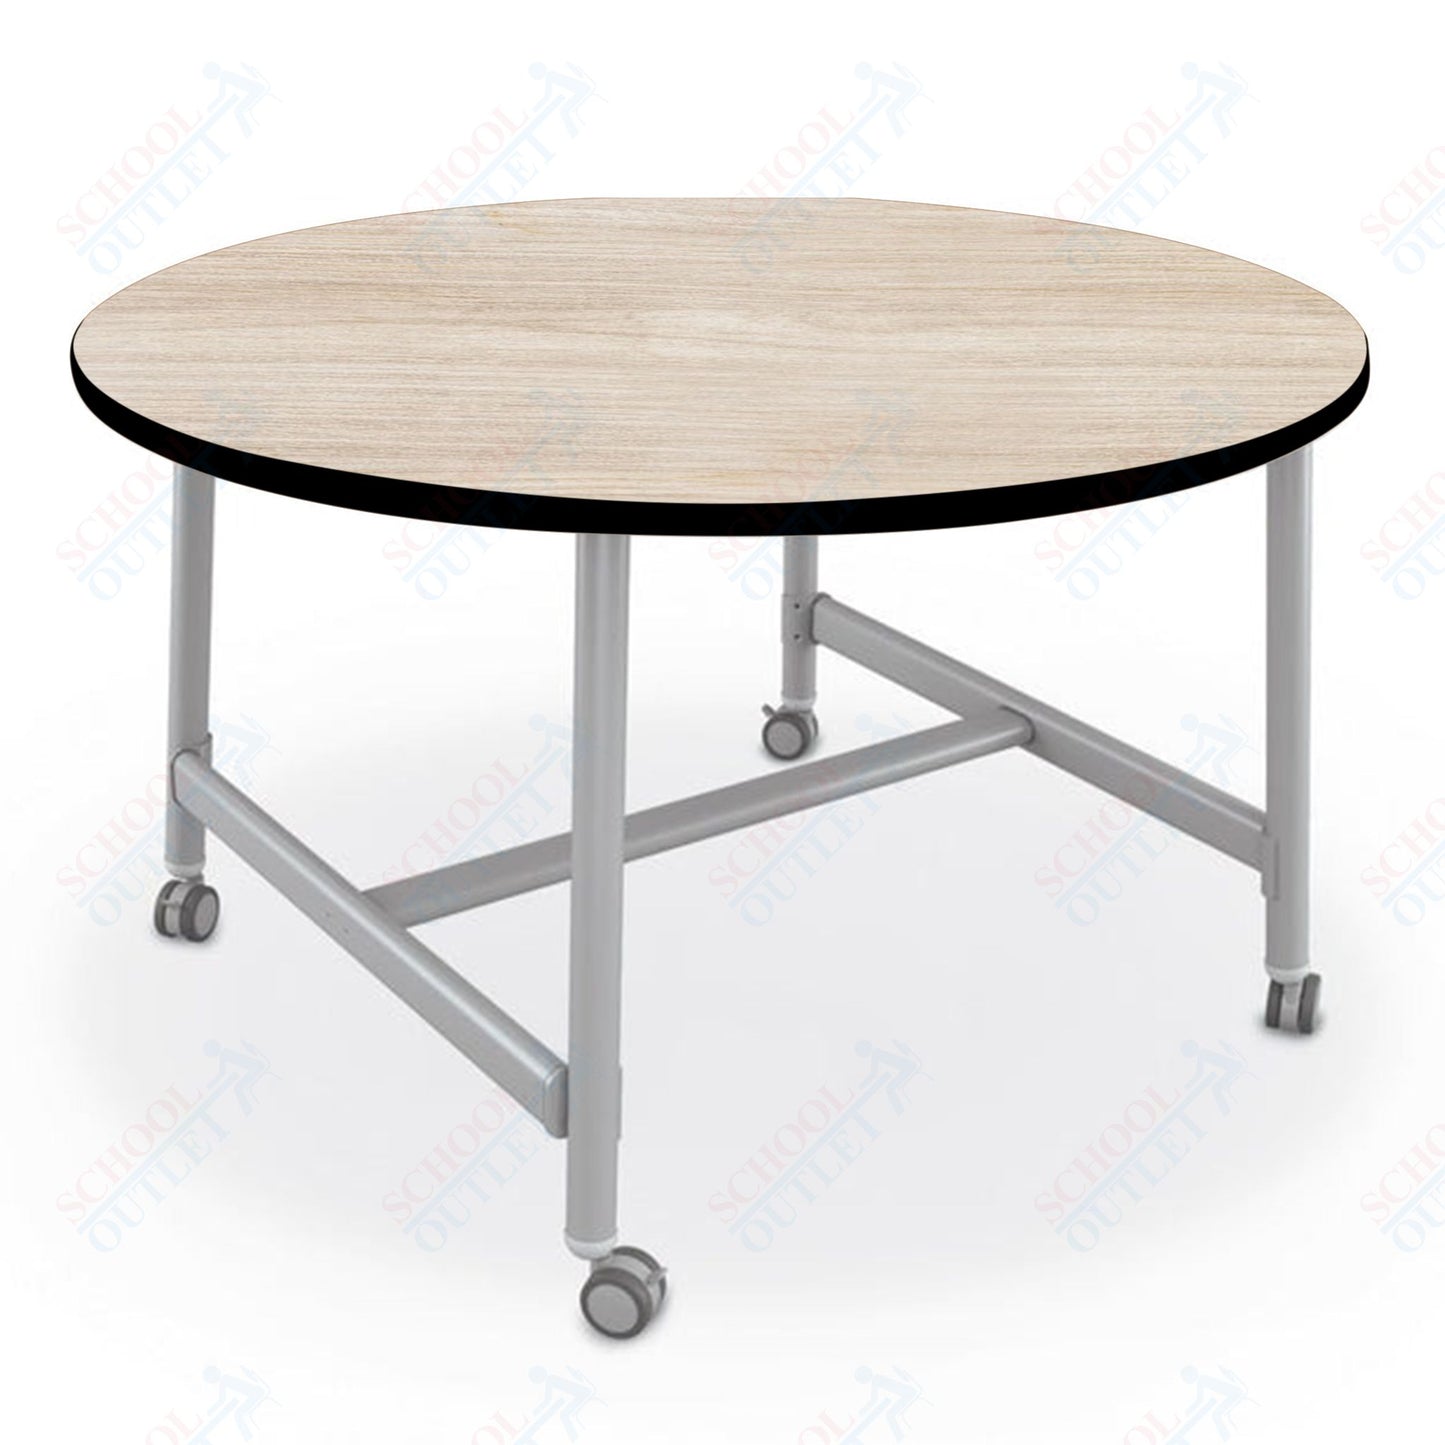 Mooreco Akt Table – 60" Round, Laminate Top, Fixed Height Available in 29"H, 36"H, or 42"H